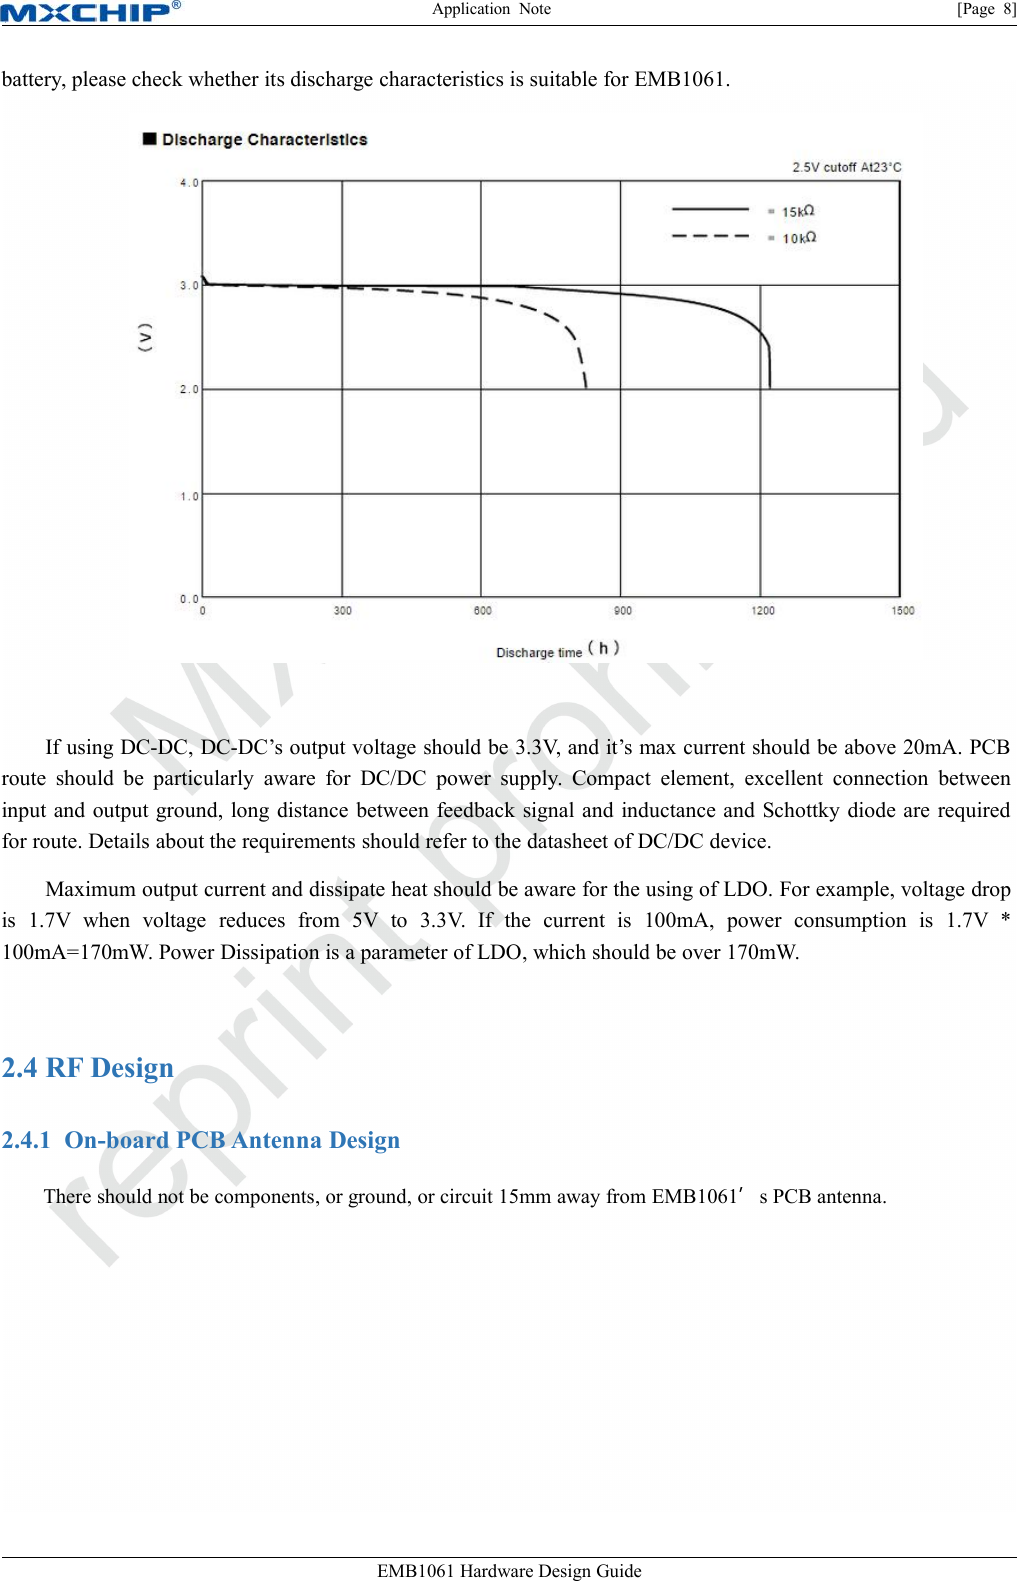 Application Note [Page 8]EMB1061 Hardware Design Guidebattery, please check whether its discharge characteristics is suitable for EMB1061.If using DC-DC, DC-DC’s output voltage should be 3.3V, and it’s max current should be above 20mA. PCBroute should be particularly aware for DC/DC power supply. Compact element, excellent connection betweeninput and output ground, long distance between feedback signal and inductance and Schottky diode are requiredfor route. Details about the requirements should refer to the datasheet of DC/DC device.Maximum output current and dissipate heat should be aware for the using of LDO. For example, voltage dropis 1.7V when voltage reduces from 5V to 3.3V. If the current is 100mA, power consumption is 1.7V *100mA=170mW. Power Dissipation is a parameter of LDO, which should be over 170mW.2.4 RF Design2.4.1 On-board PCB Antenna DesignThere should not be components, or ground, or circuit 15mm away from EMB1061’s PCB antenna.